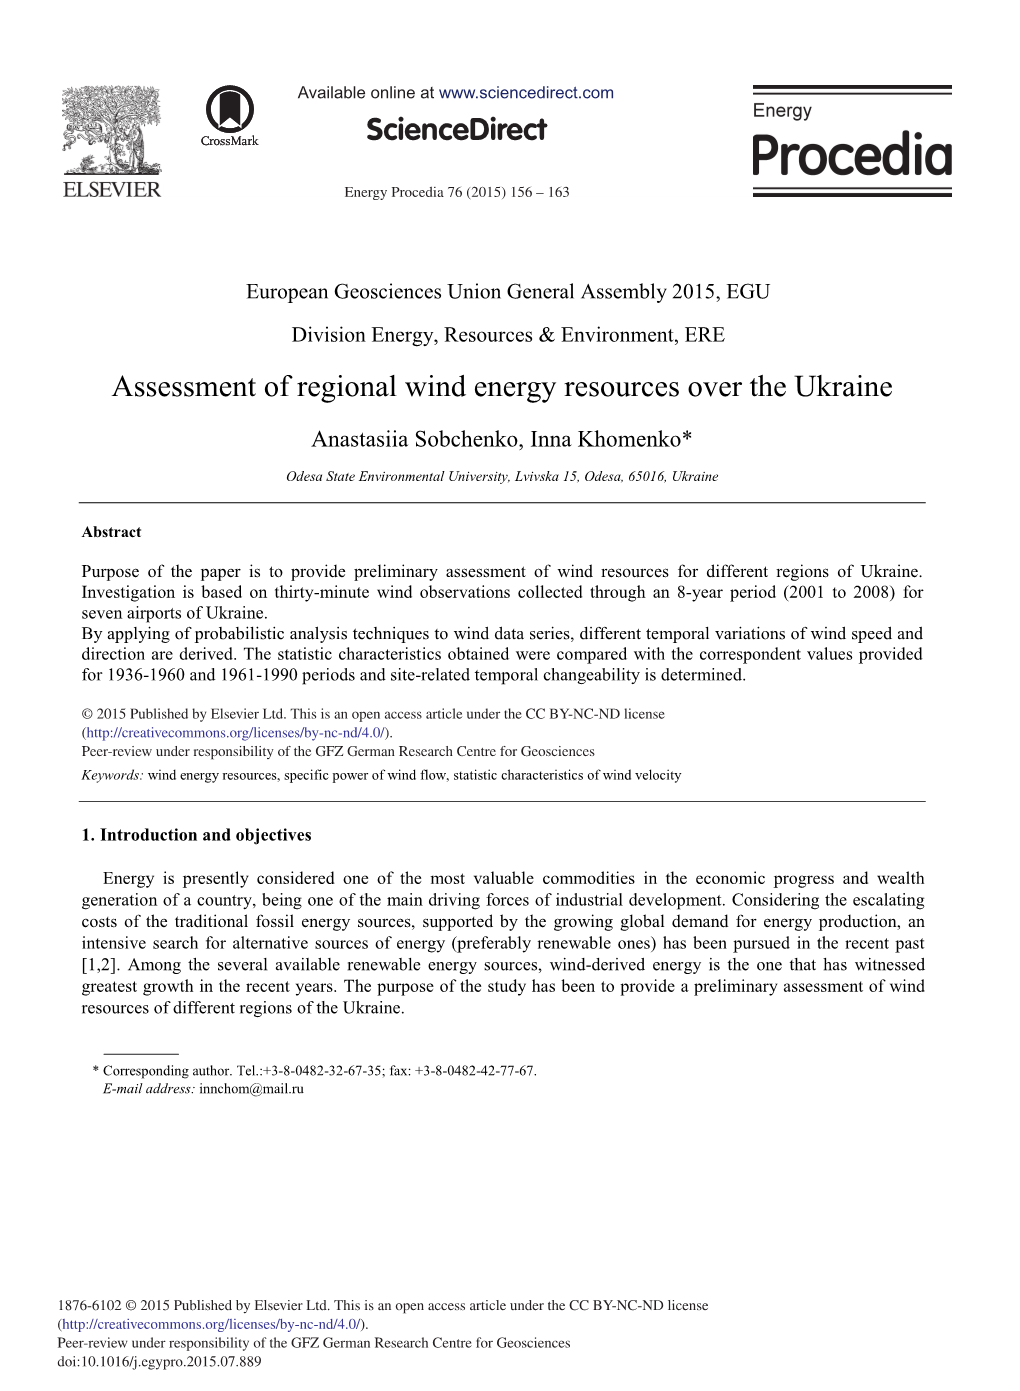 Assessment of Regional Wind Energy Resources Over the Ukraine